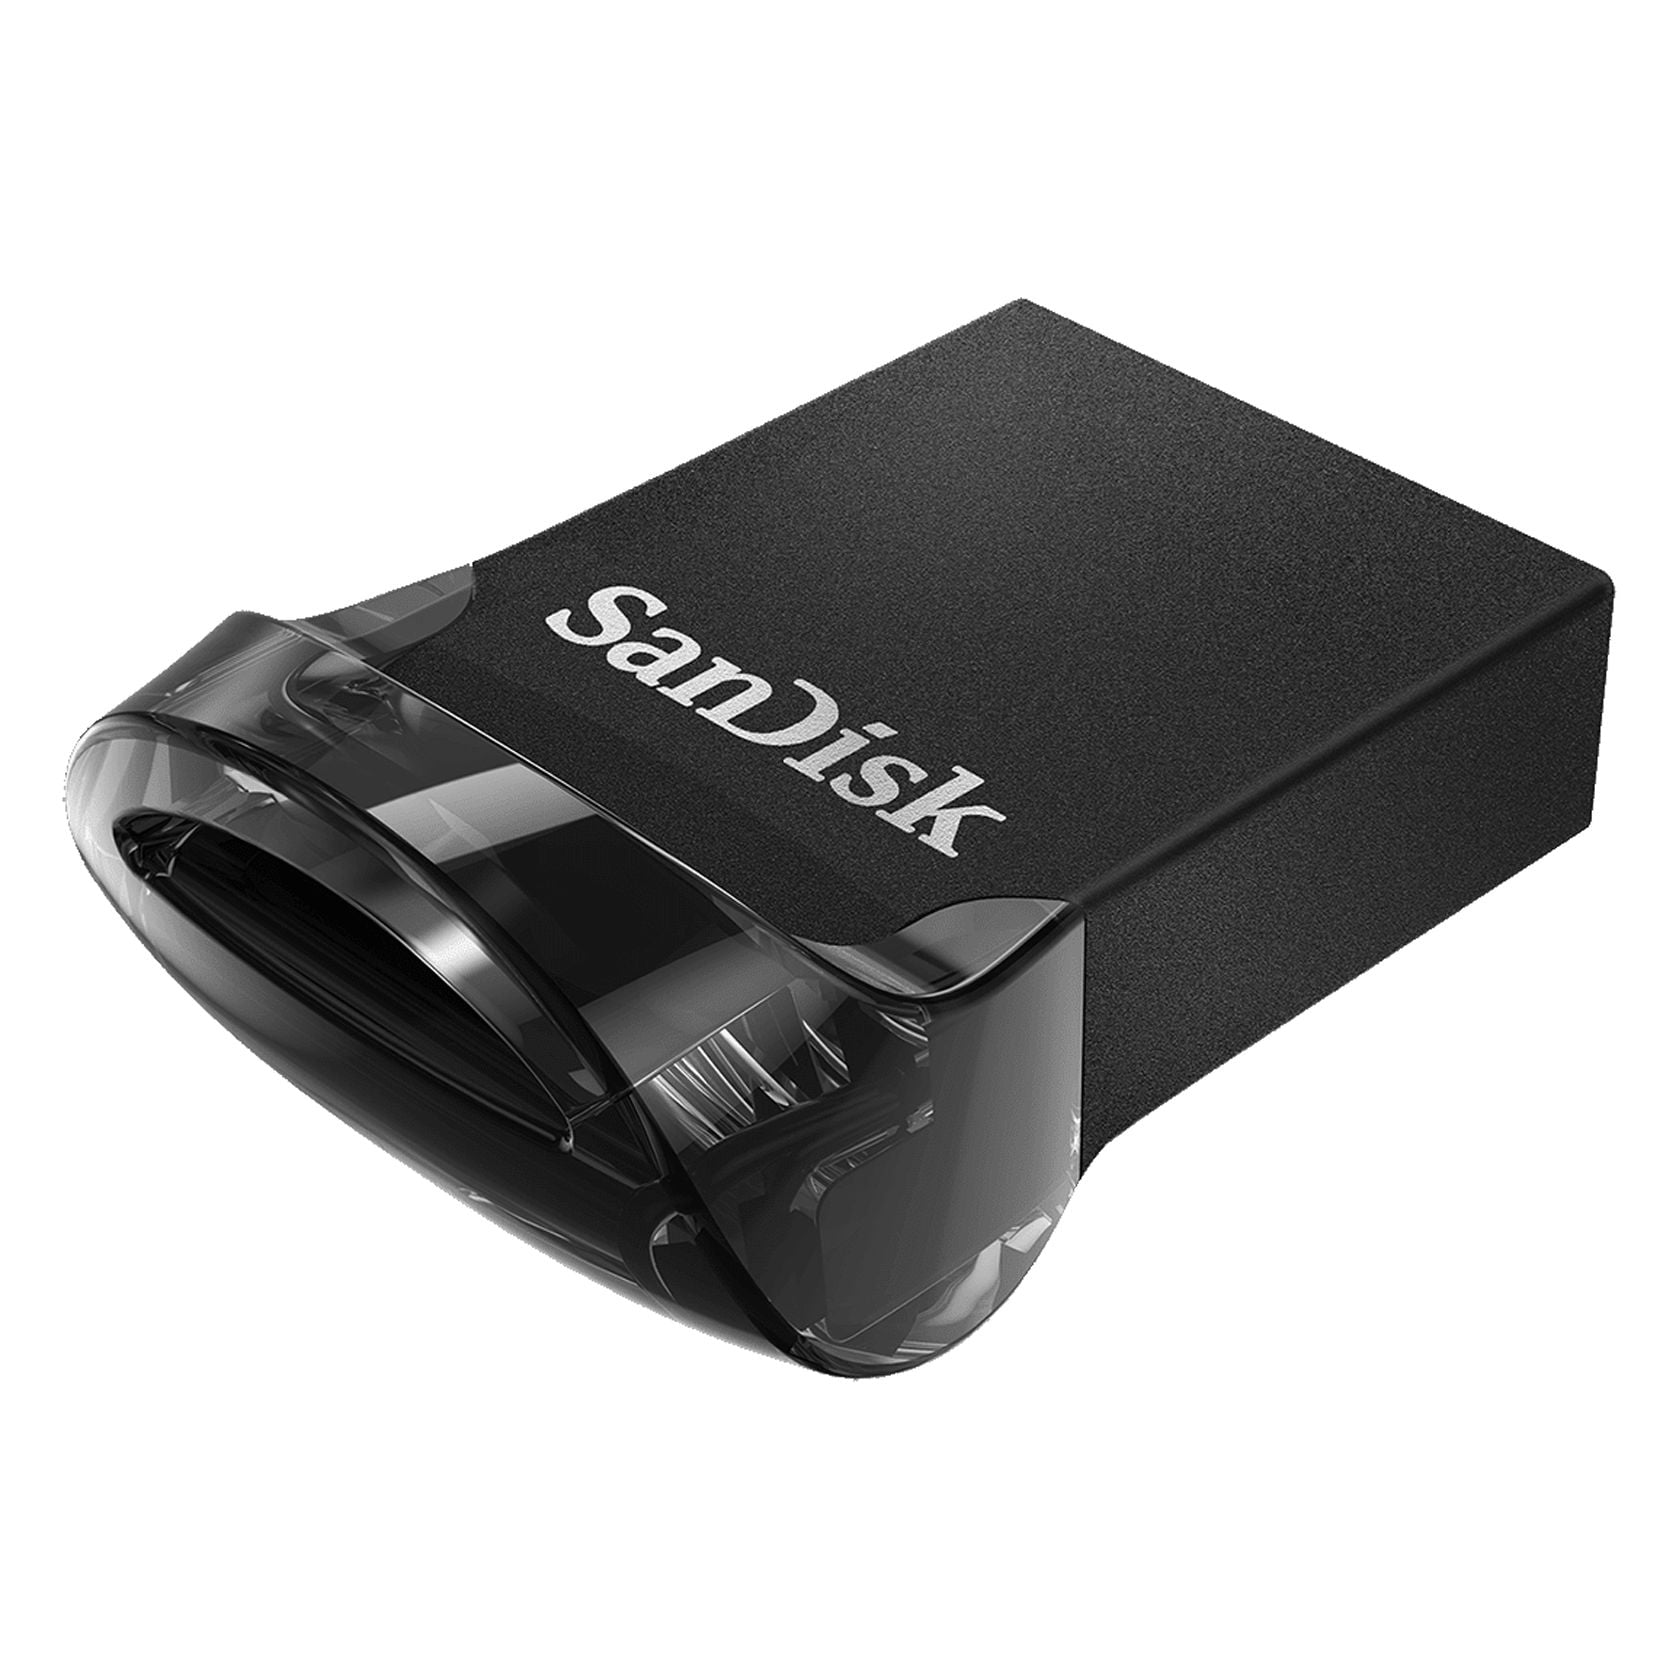 Picture of Sandisk SDCZ430-256G-A46 256 GB USB Flash Drive